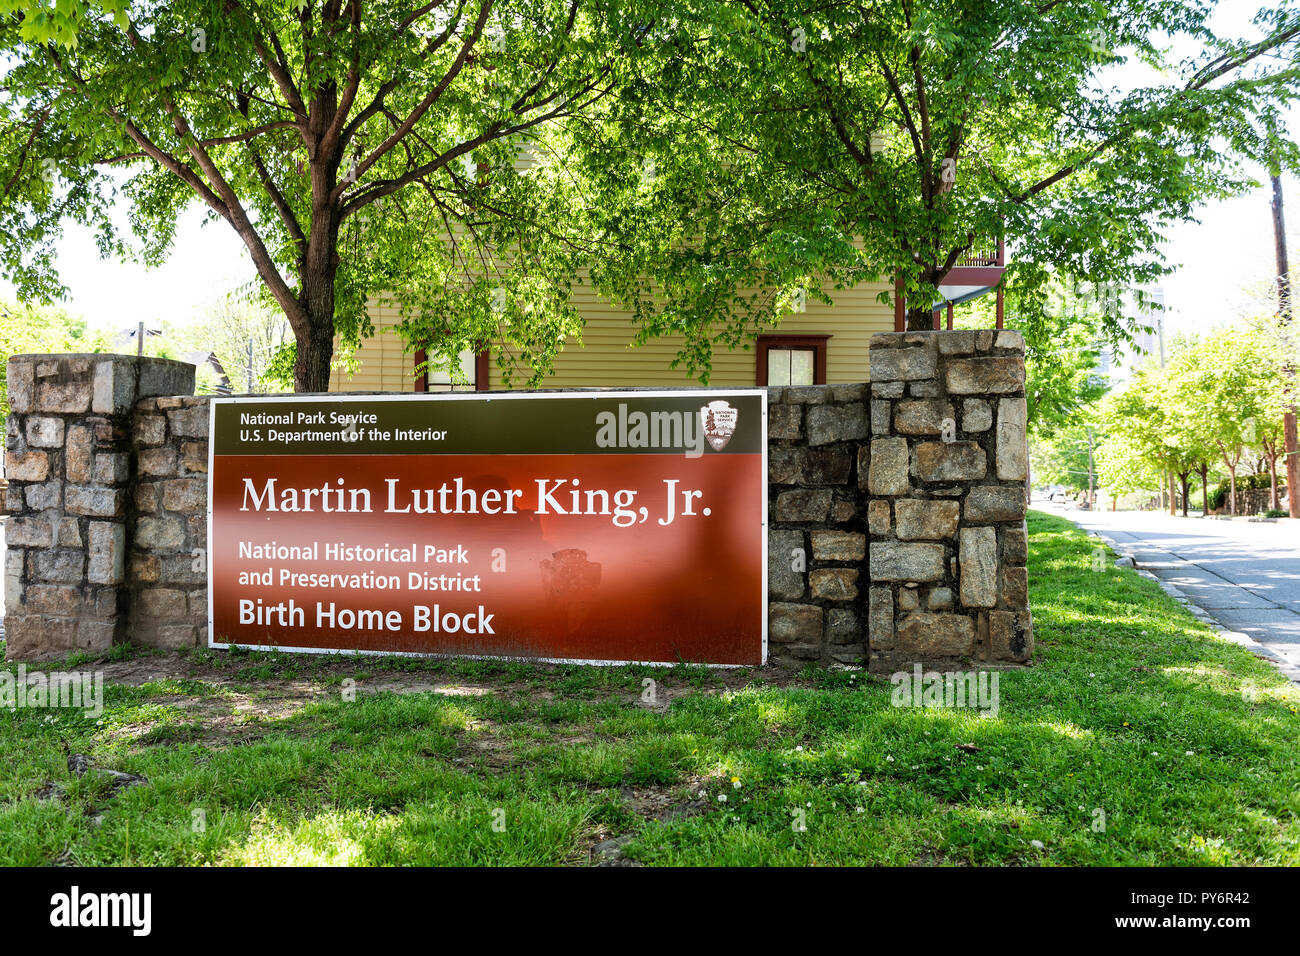 Atlanta, USA - April 20, 2018: Historic MLK Martin Luther King Jr National Park sign of birth home block in Georgia downtown, green trees in urban cit Stock Photo